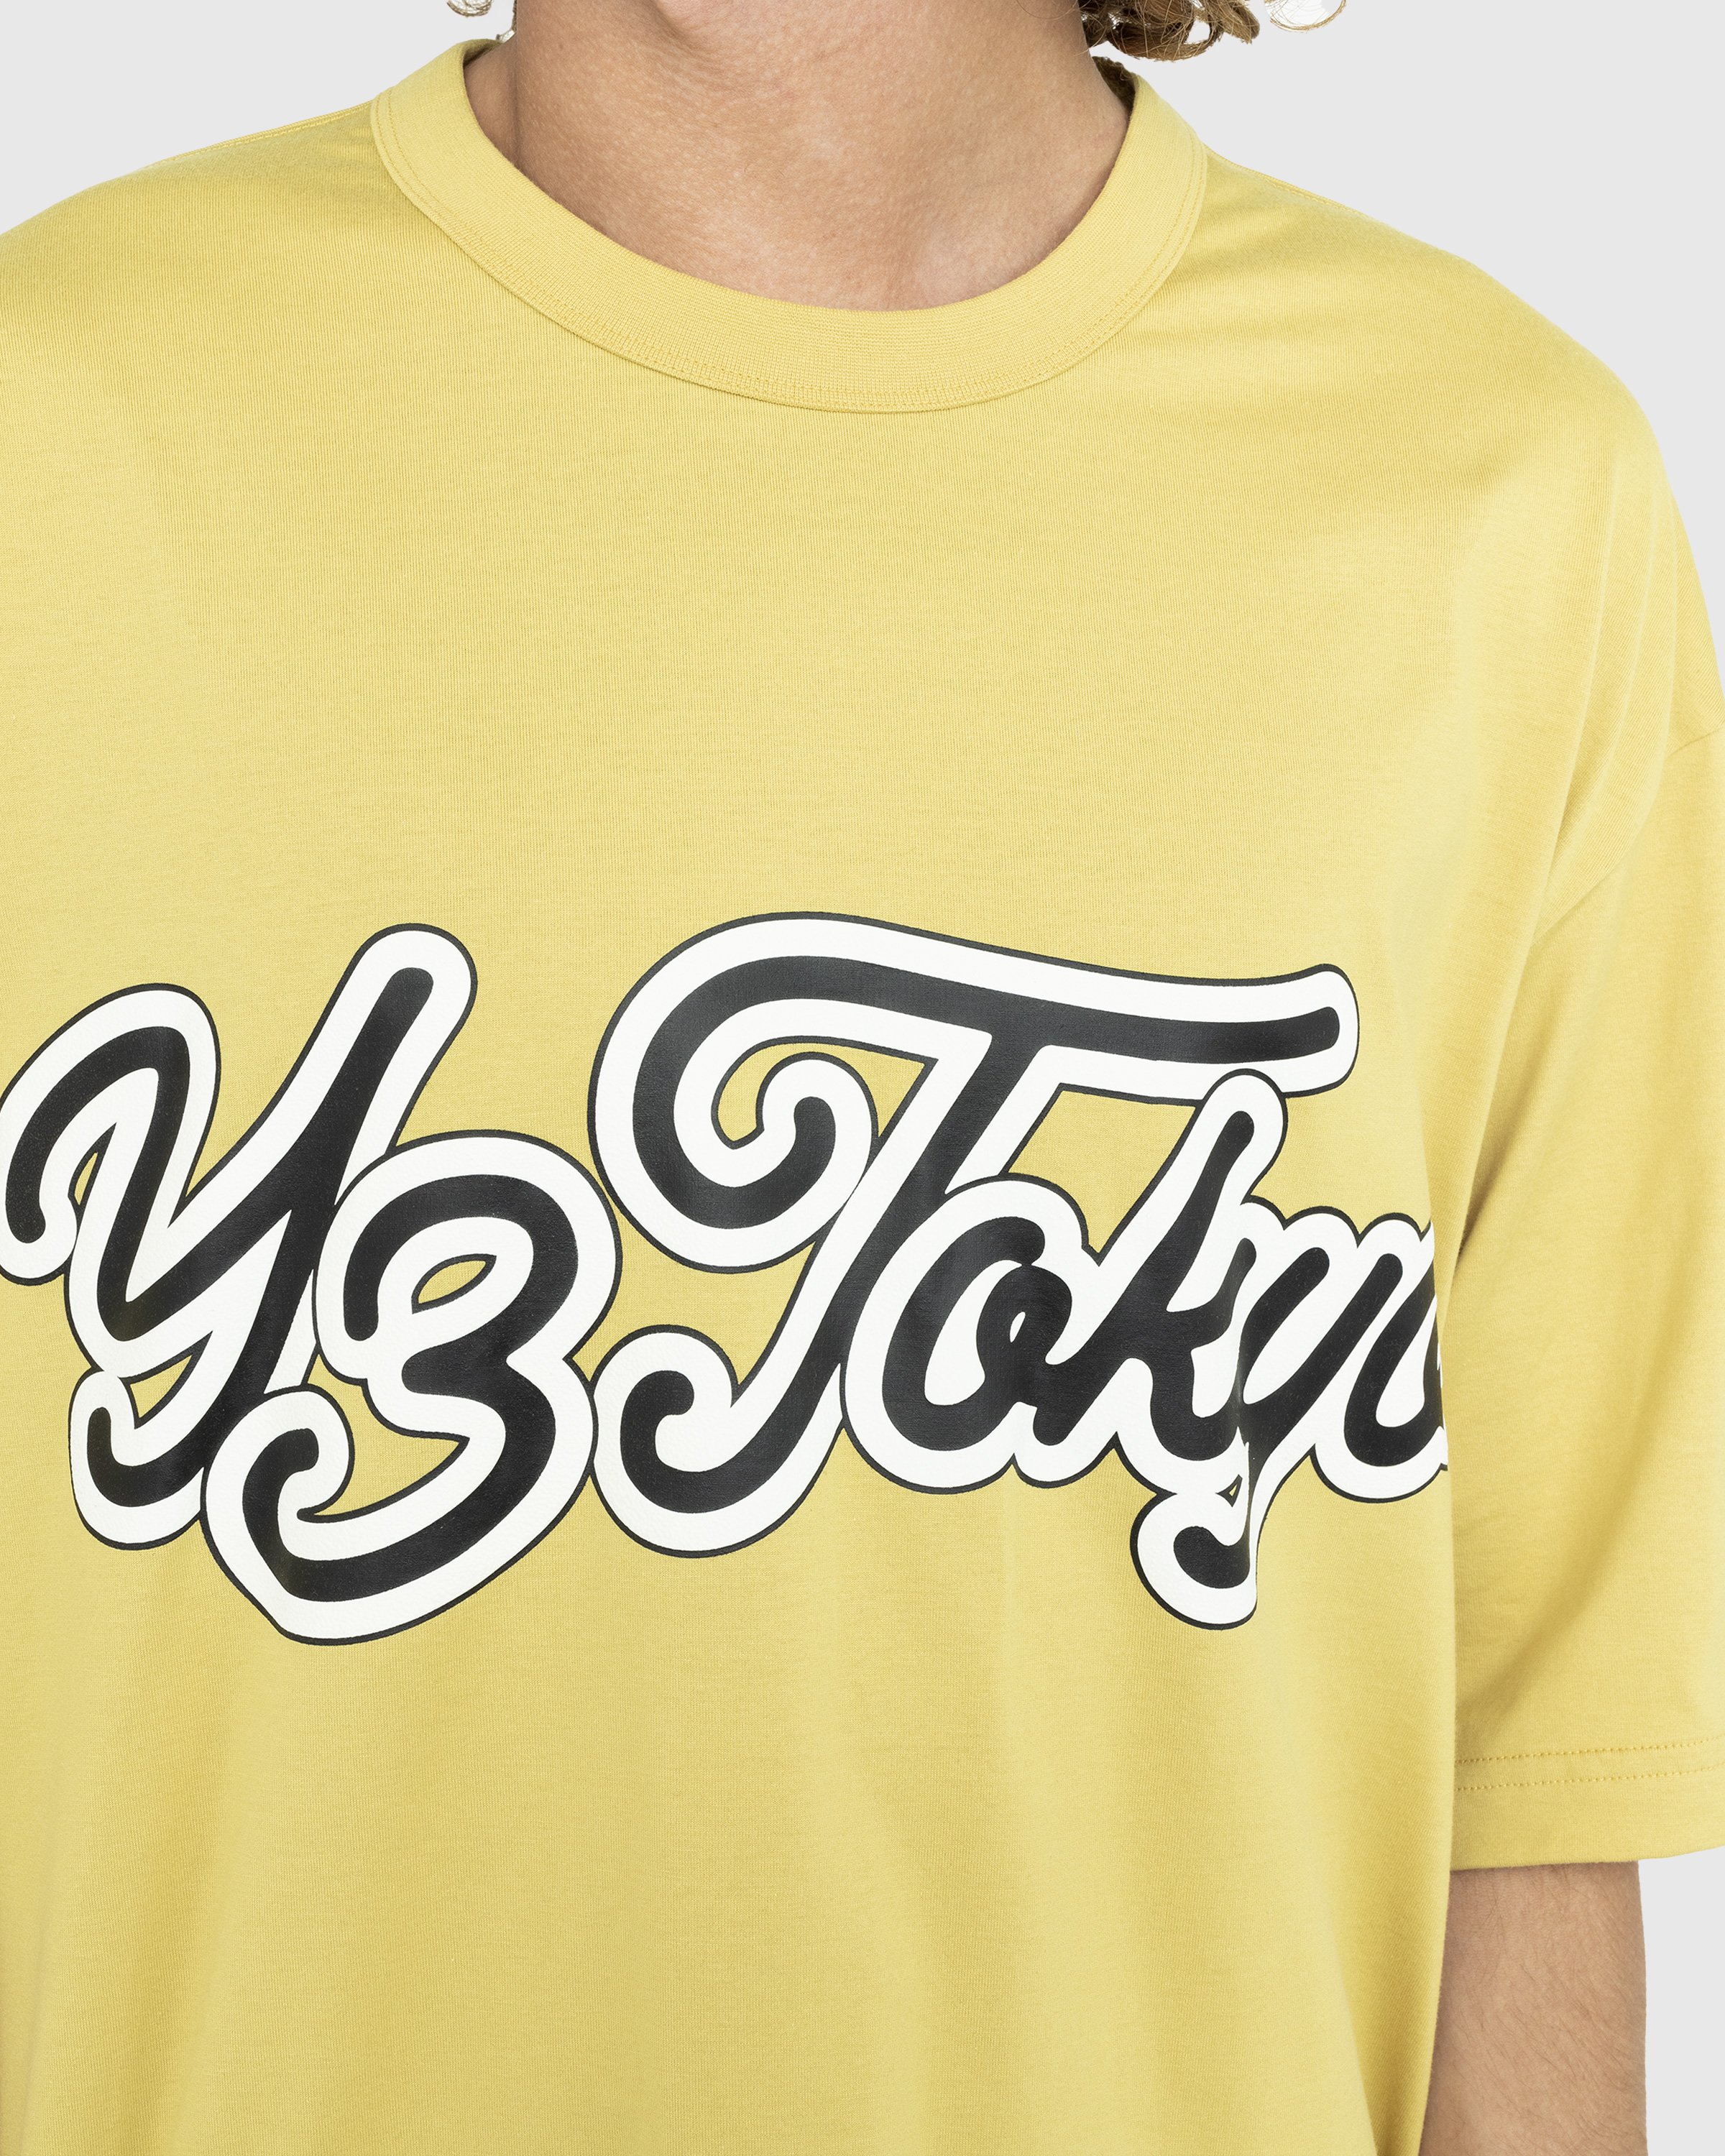 Y-3 - Tokyo T-Shirt Blanch Yellow - Clothing - Yellow - Image 4